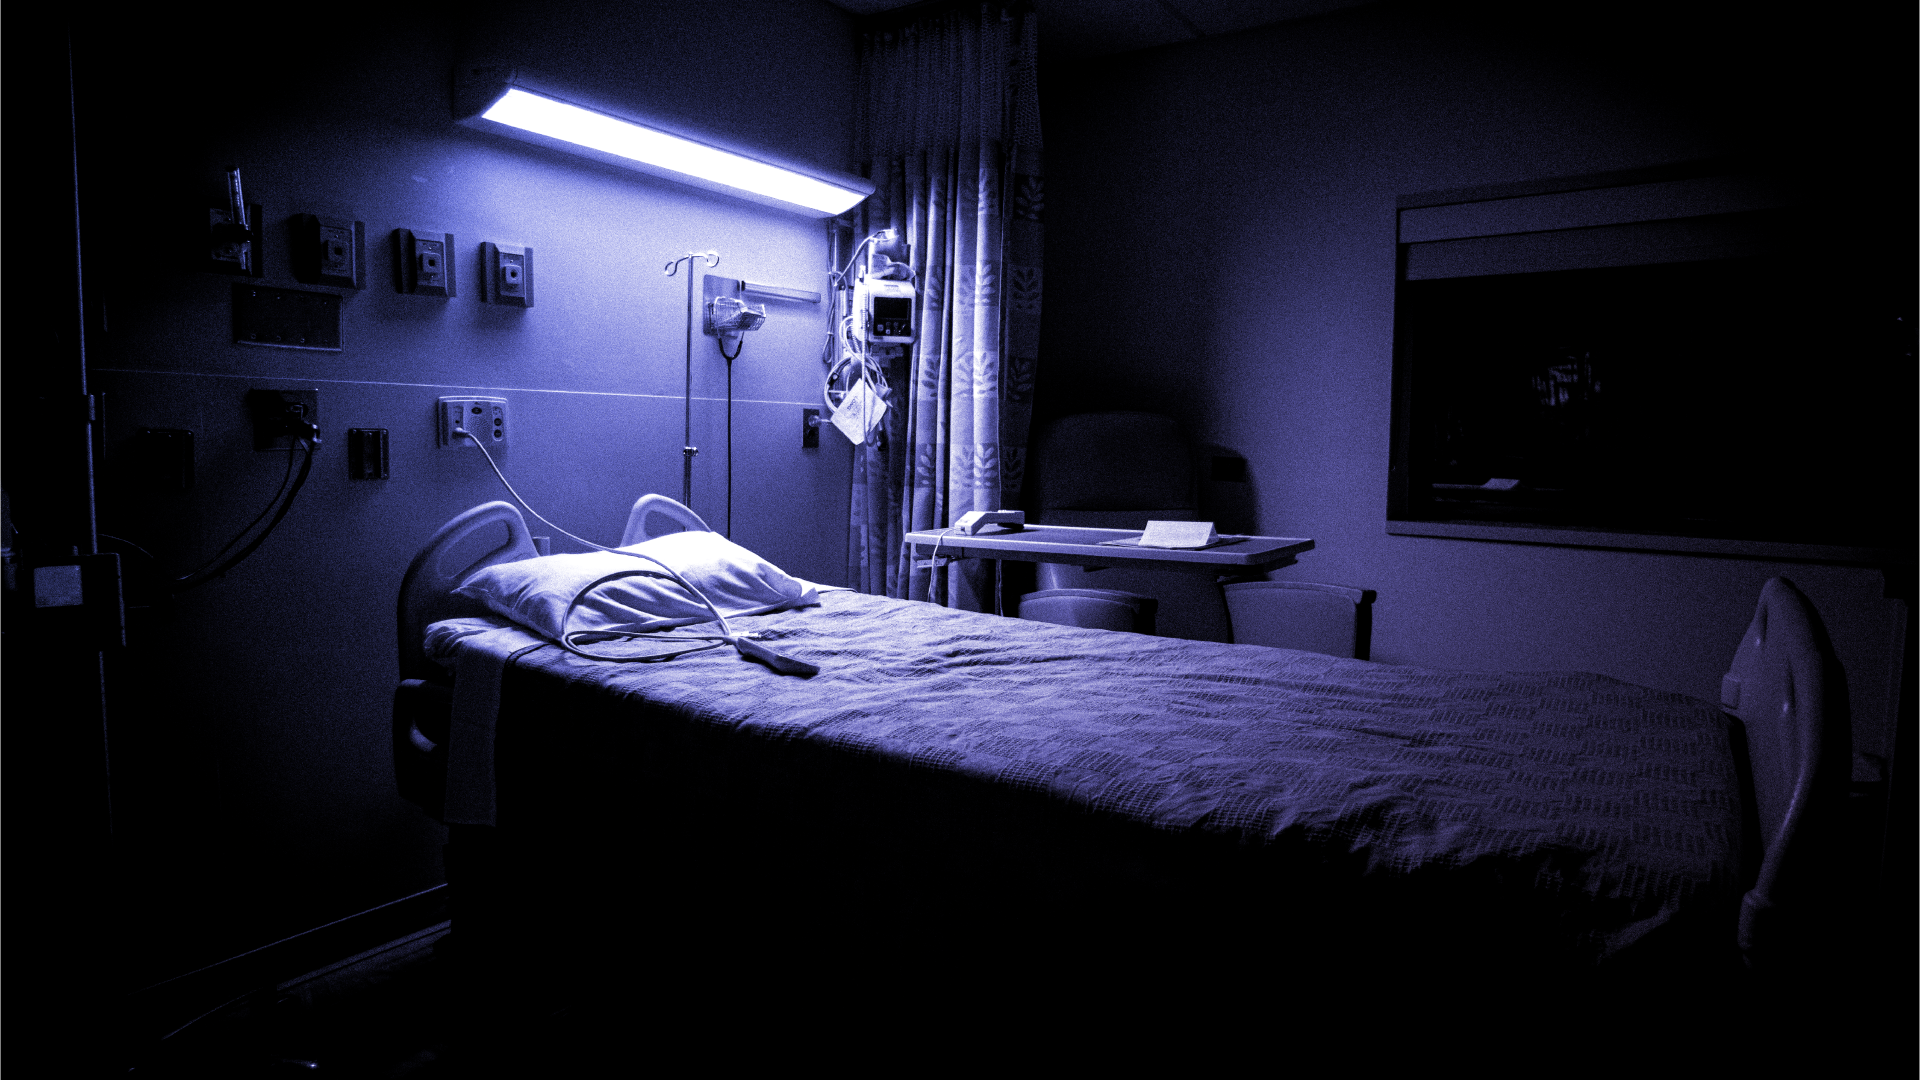 A photo of a hospital bed.